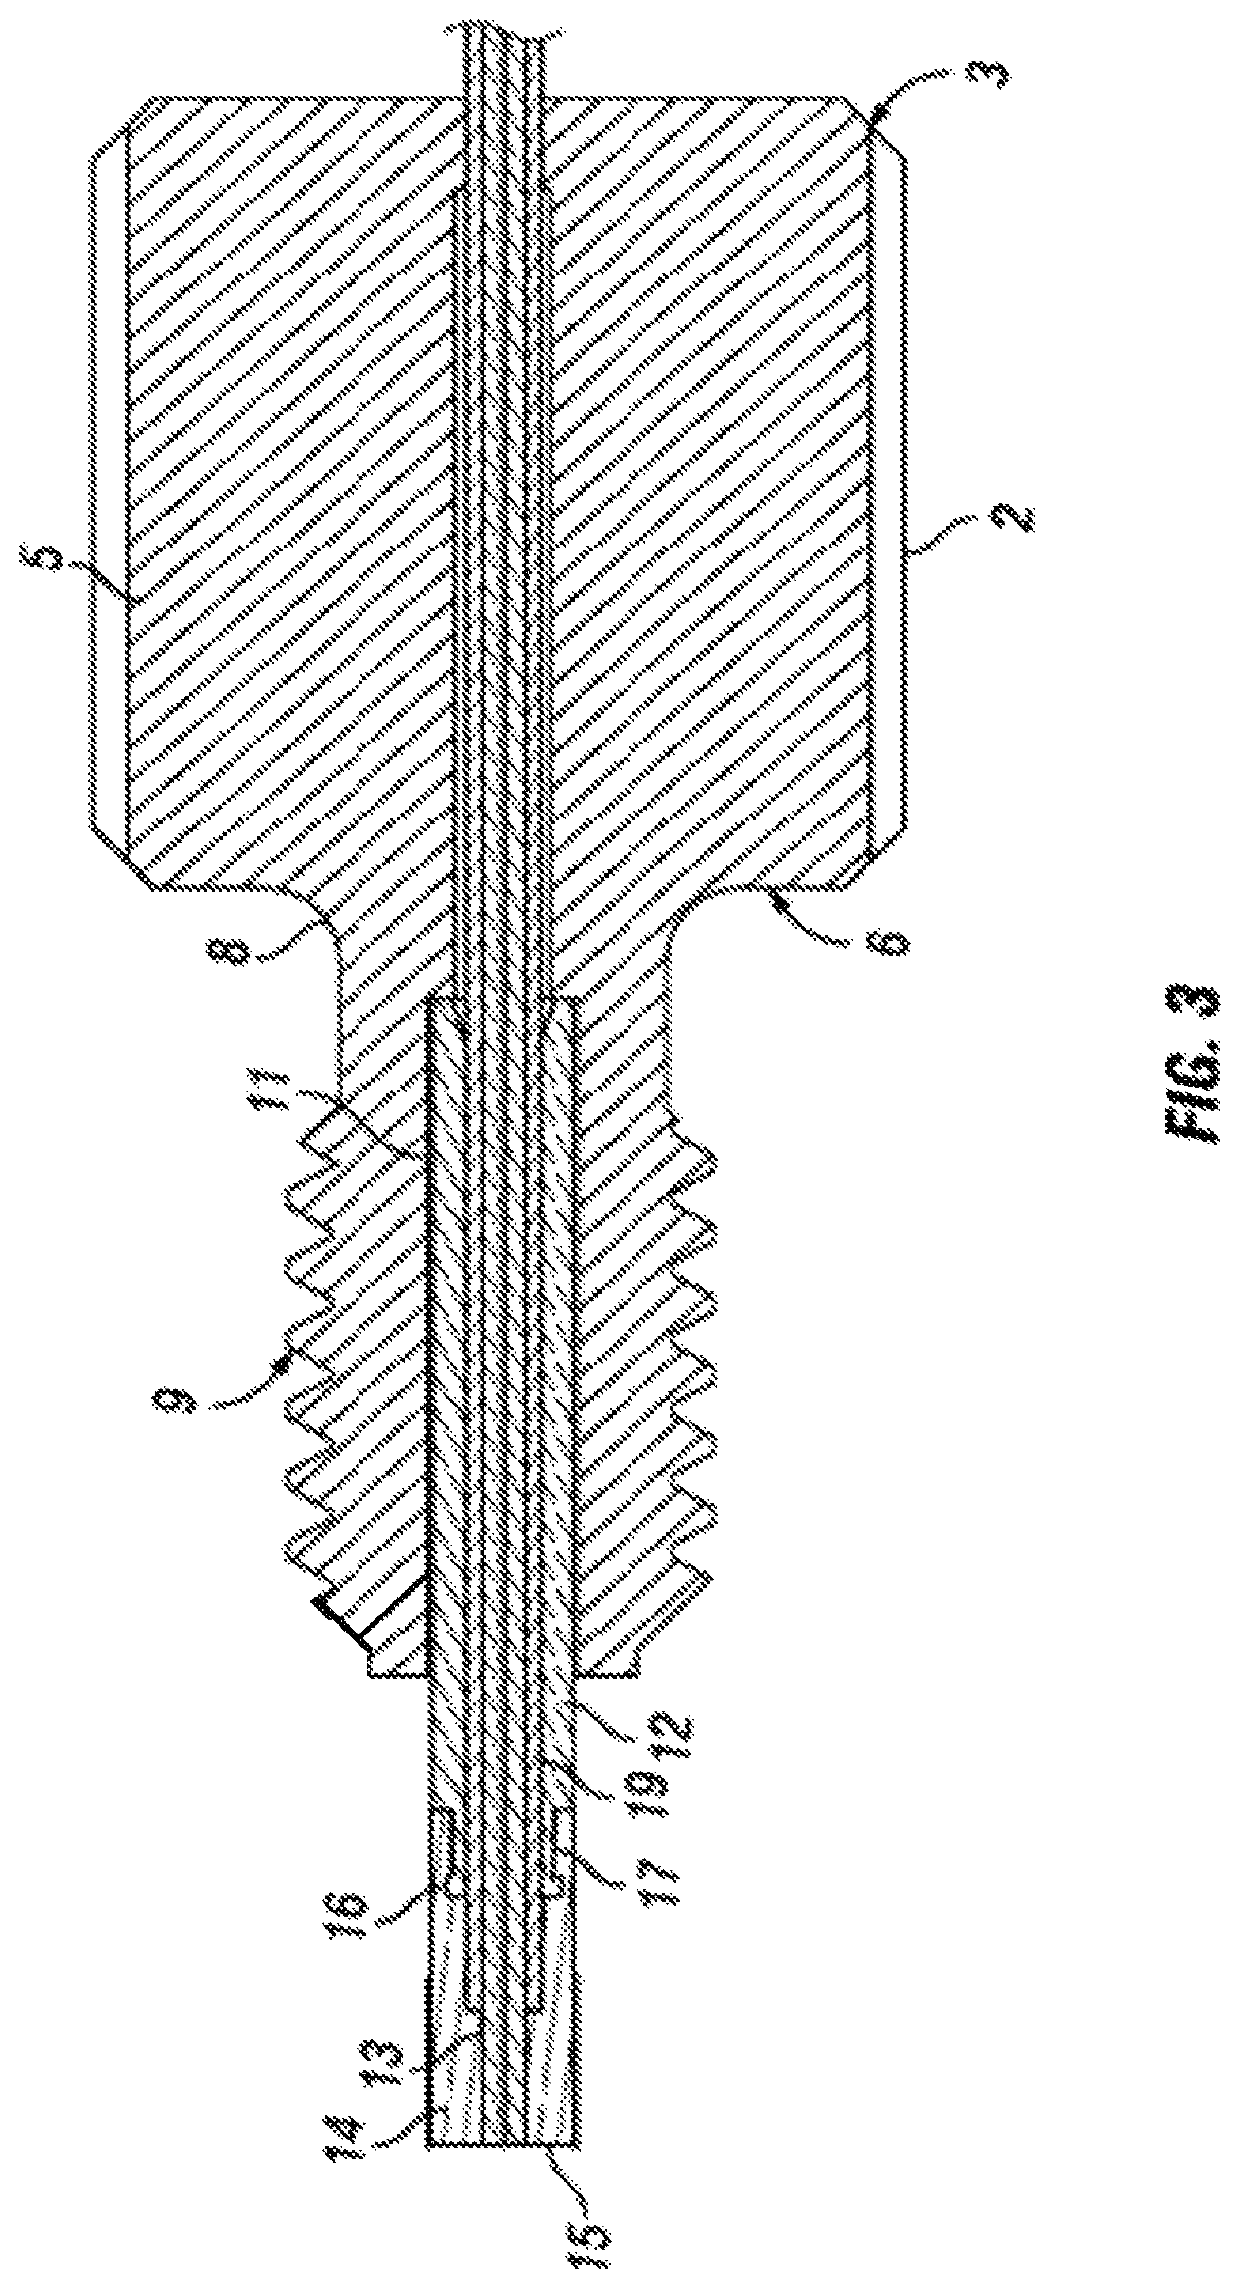 Face-sealing fluidic connection system